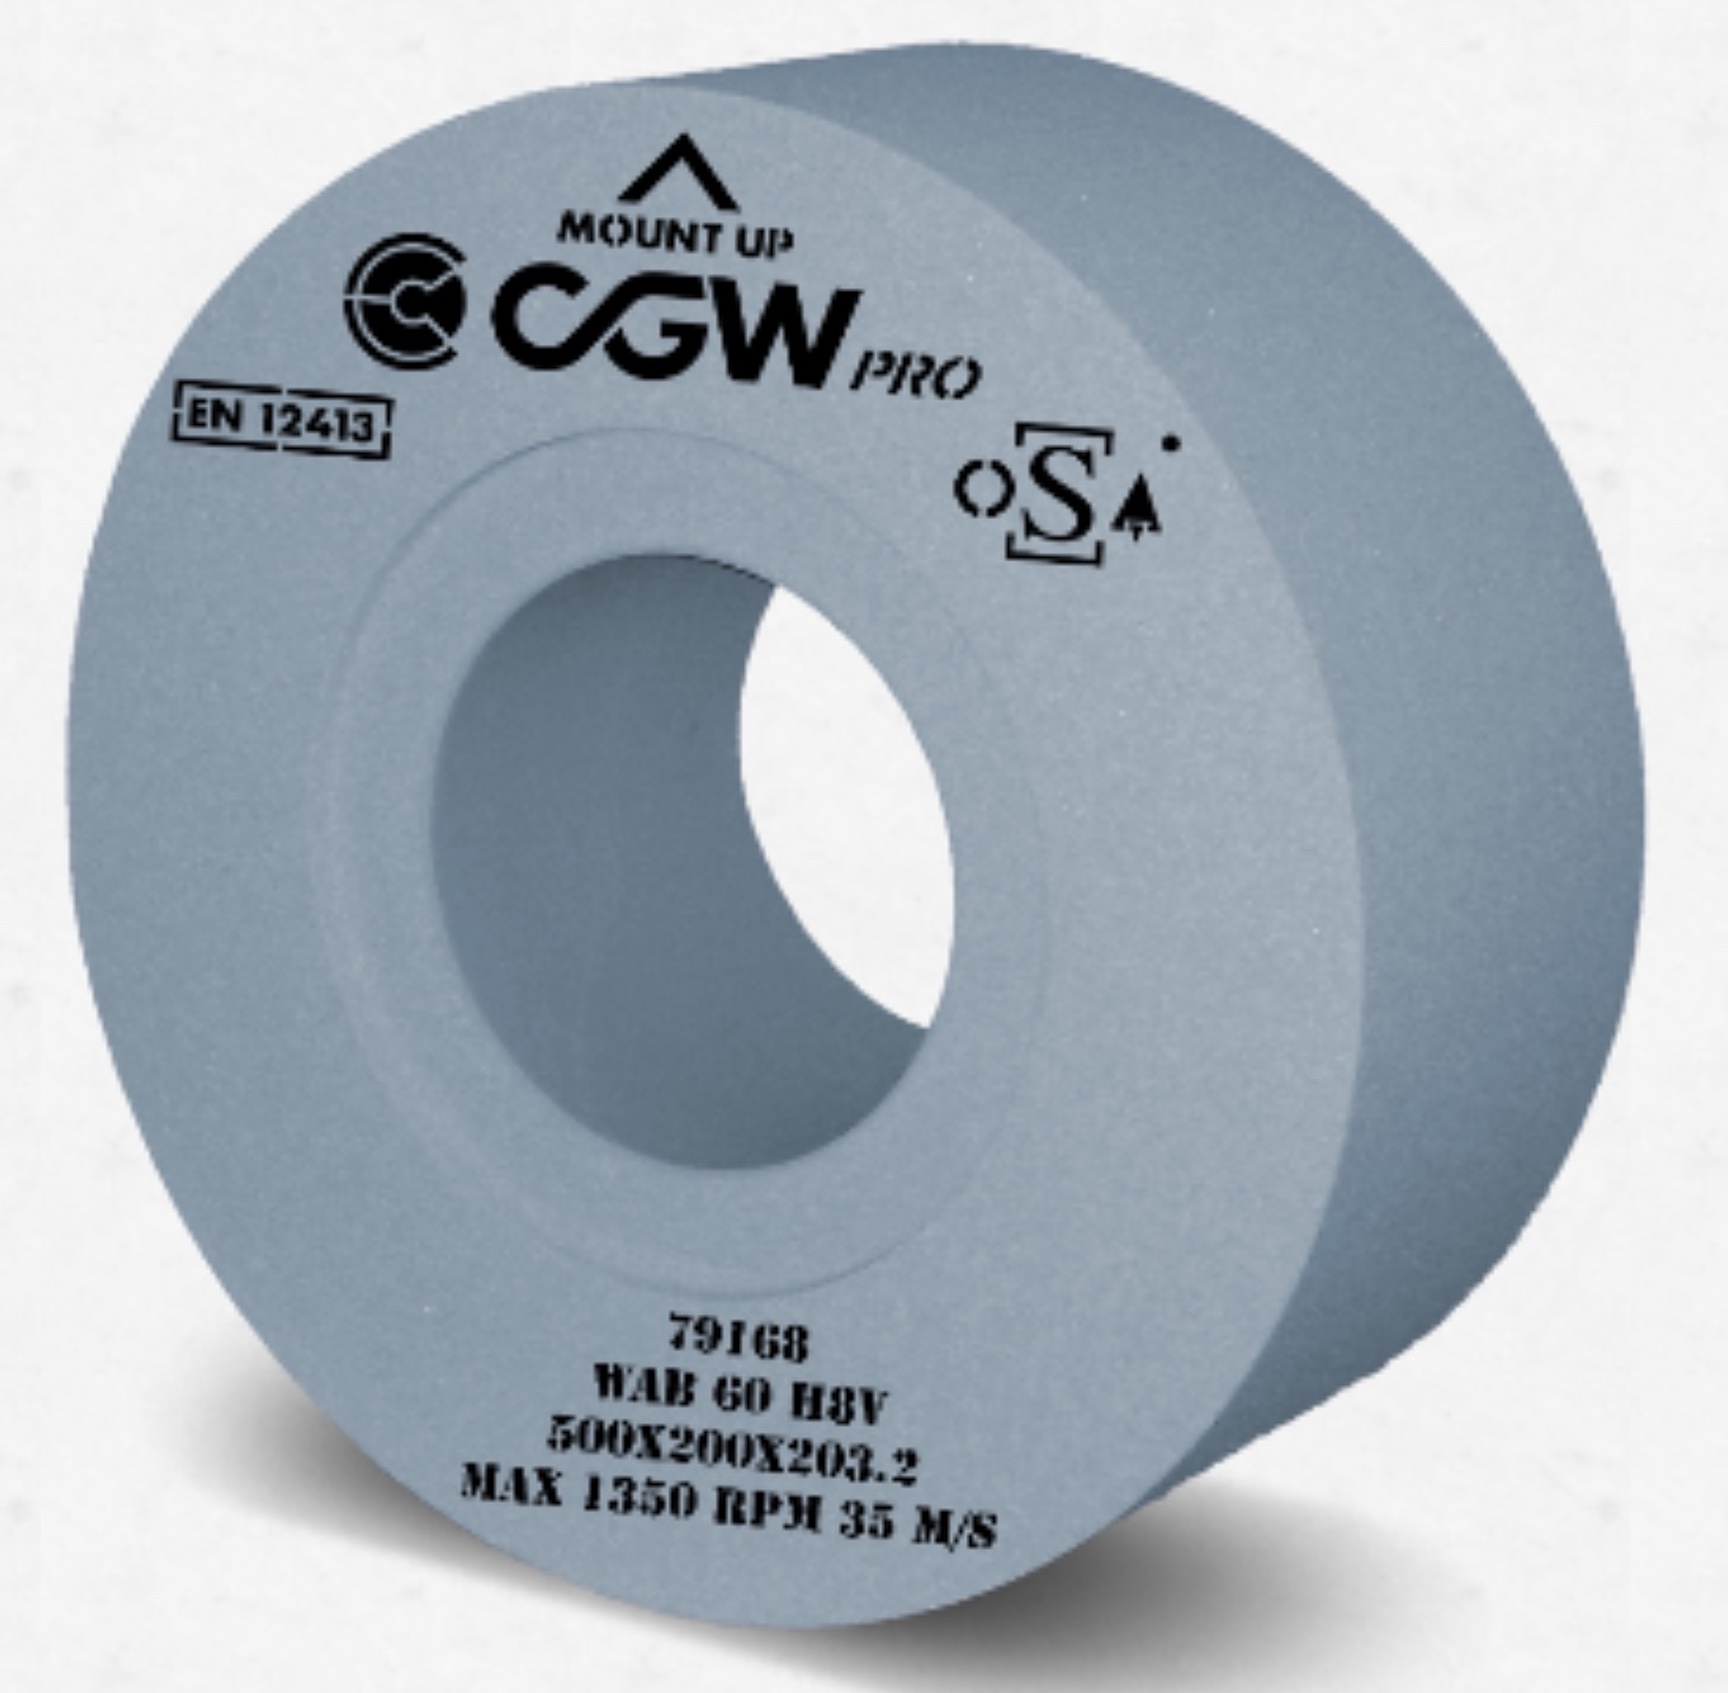 For general-purpose cylindrical grinding of most ferrous materials, CGW Abrasives recommends its proprietary AZ grain shown here, a premium blue aluminum oxide. (Image courtesy of CGW Abrasives)